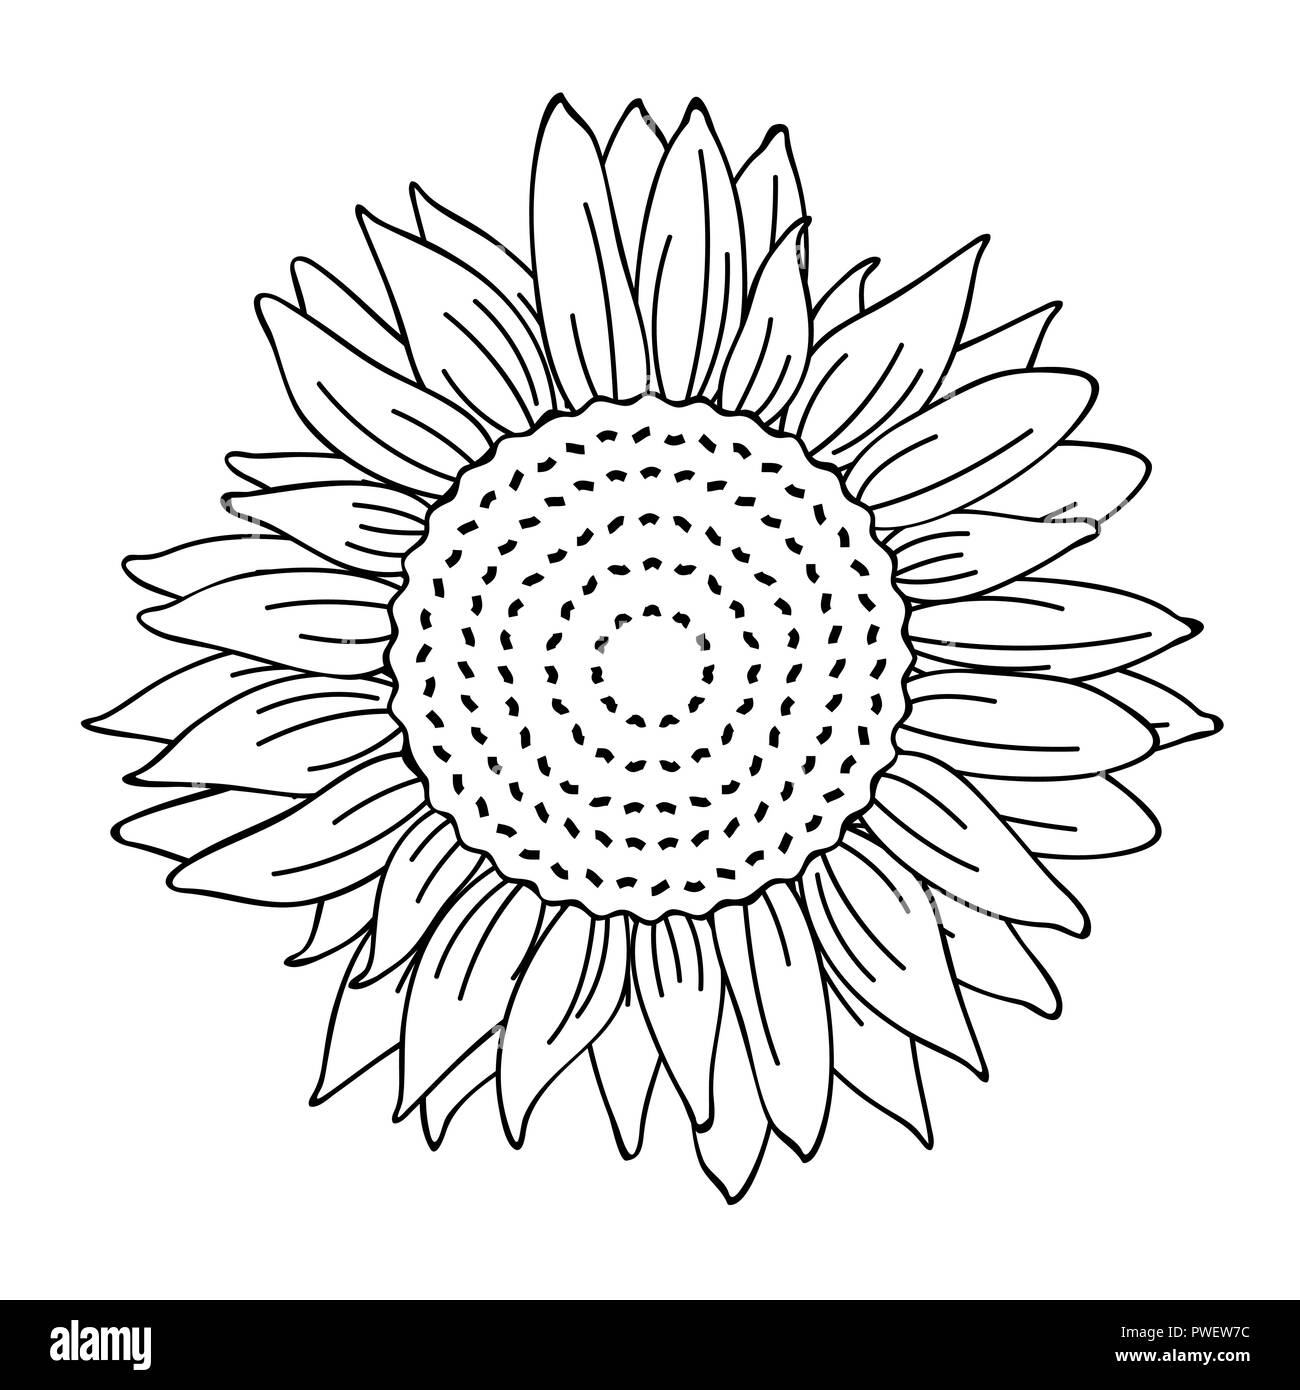 sunflower simple drawing outline for coloring book vector illustration EPS10 Stock Vector